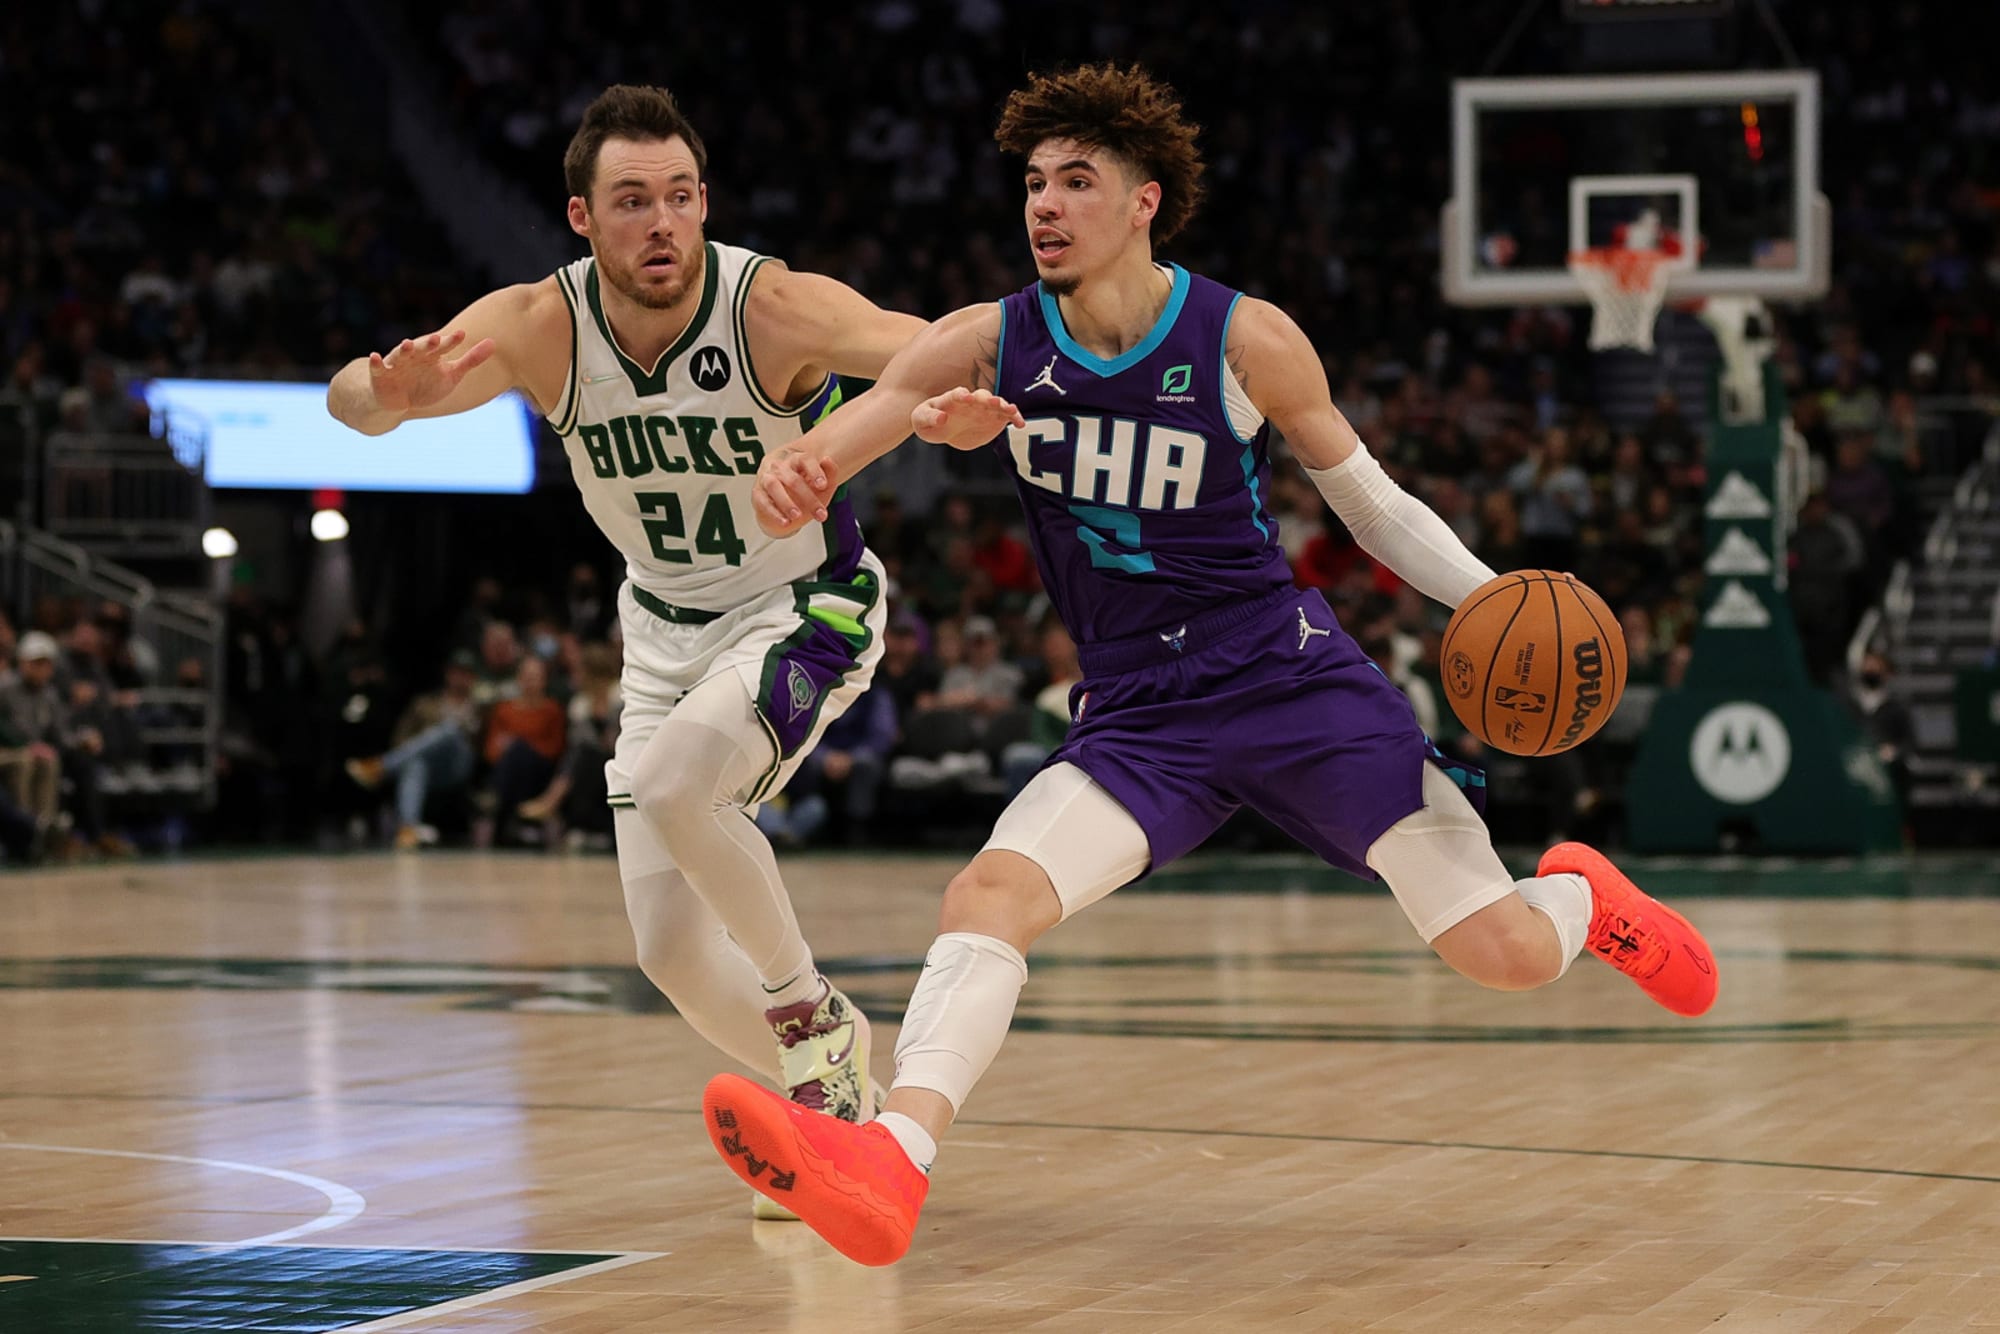 Hornets' LaMelo Ball is making strong case to be a 2022 NBA All-Star